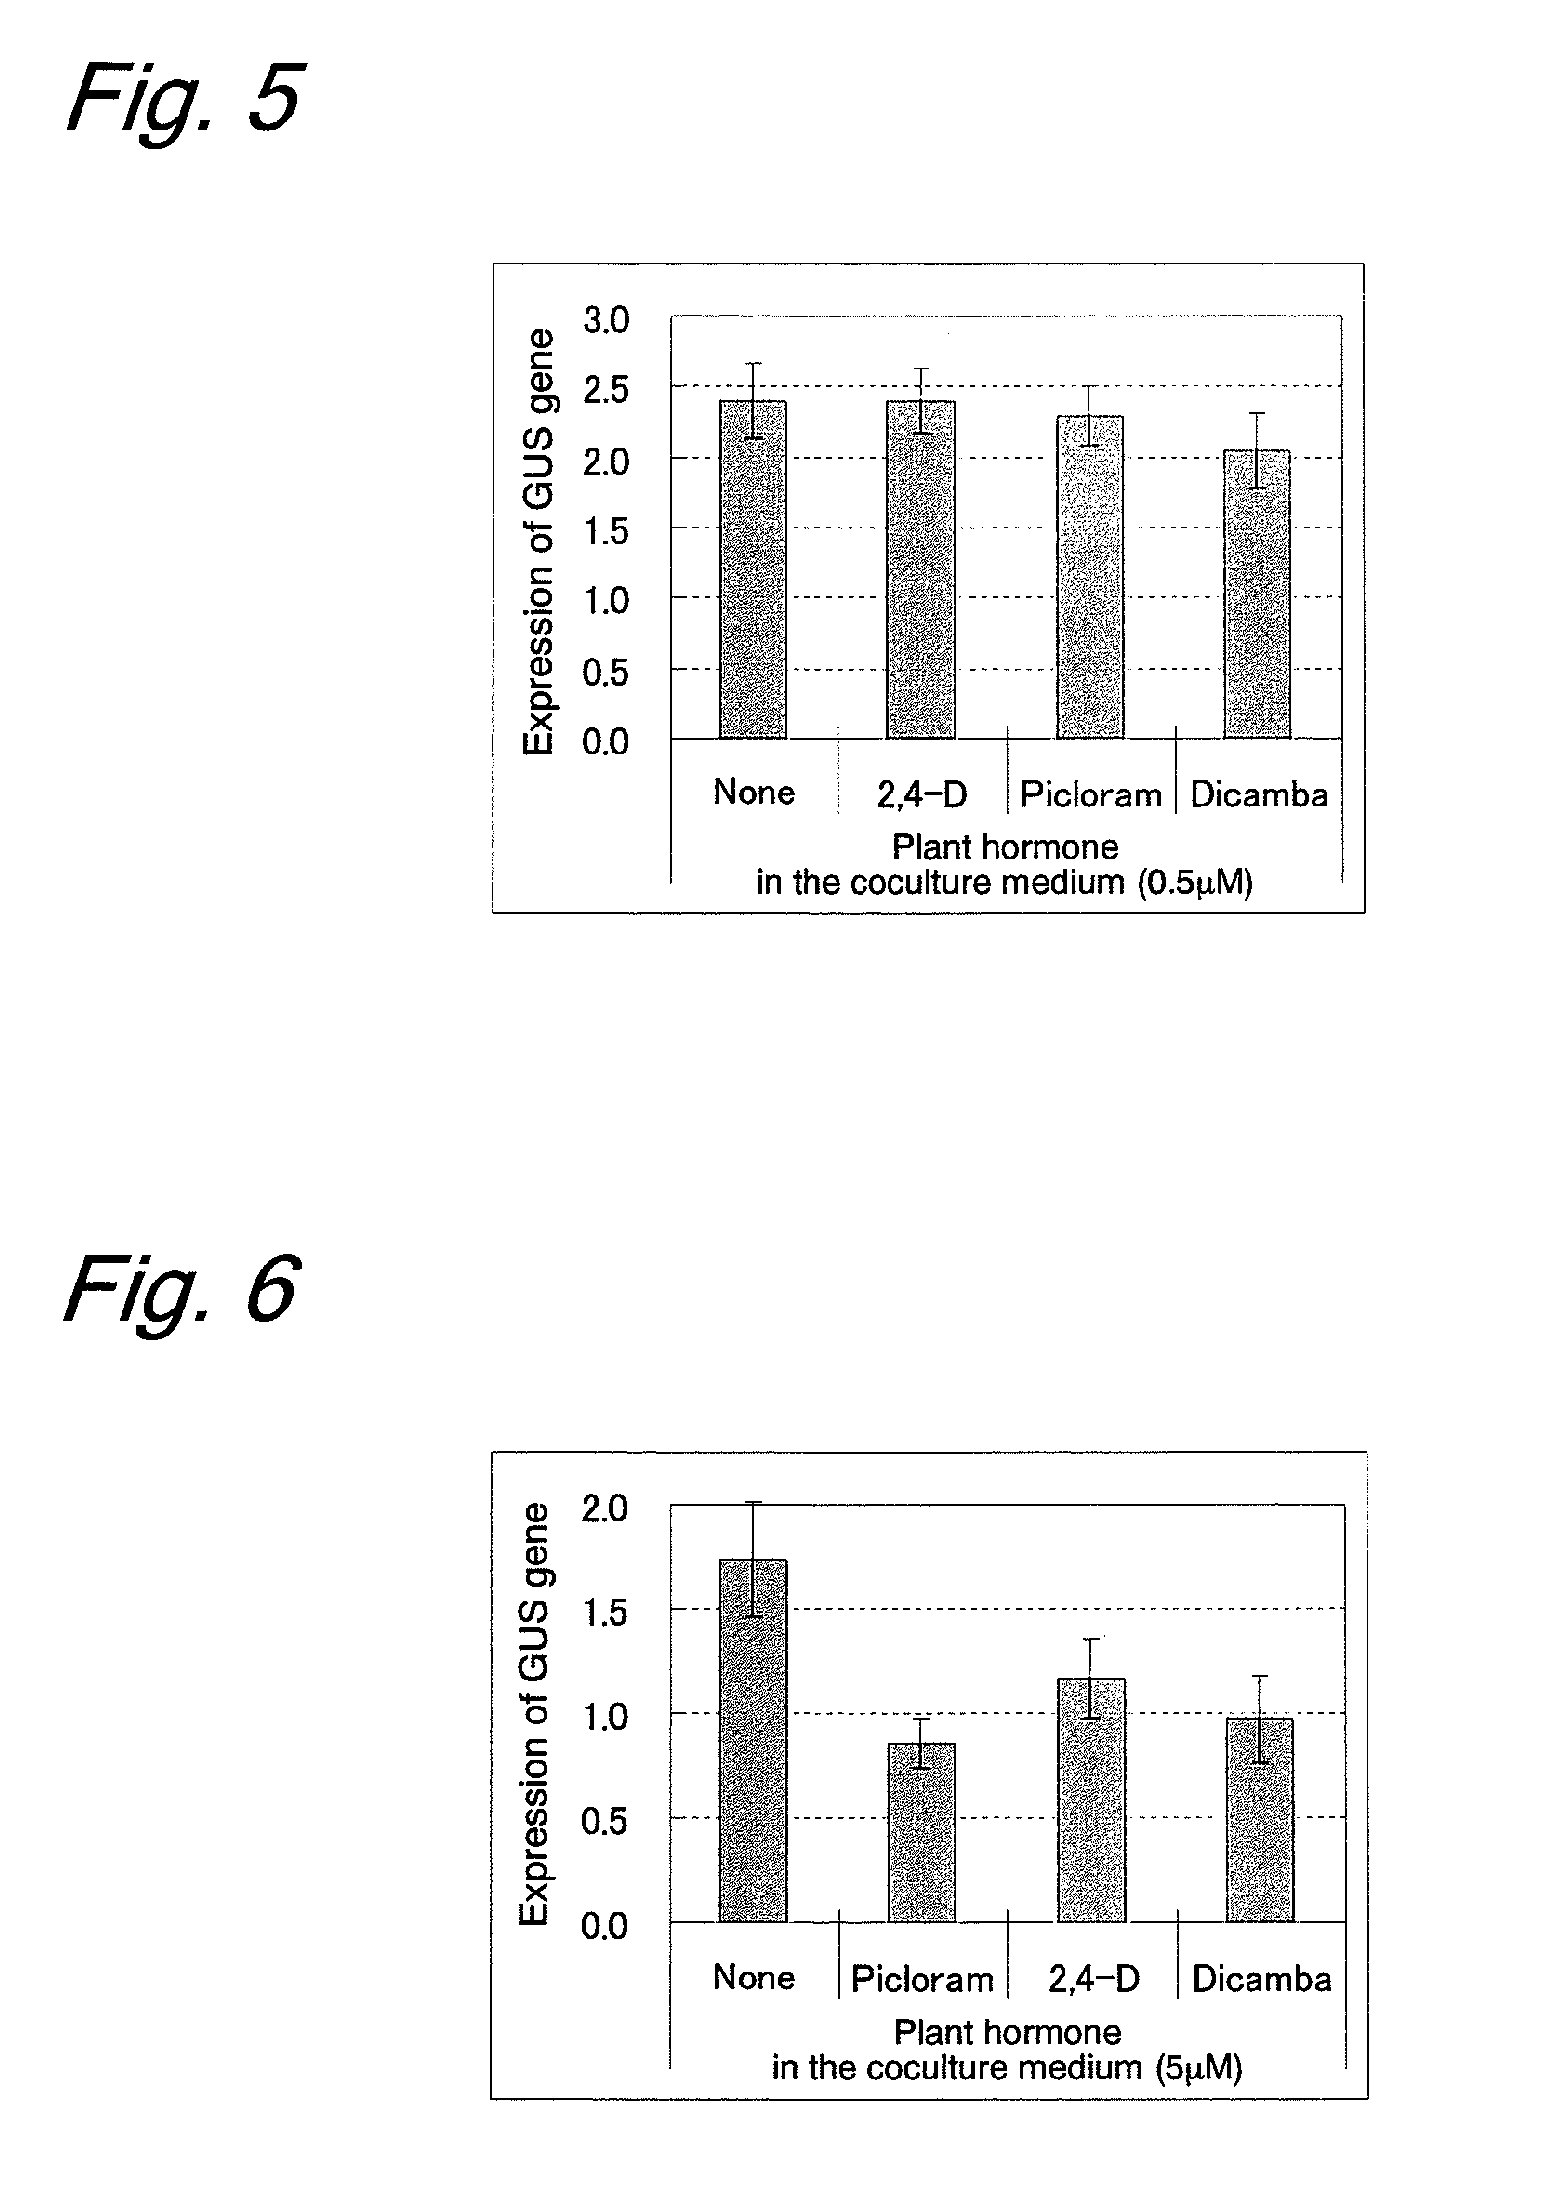  method of gene introduction into triticum plant using agrobacterium, and a method of producing transformed triticum plant